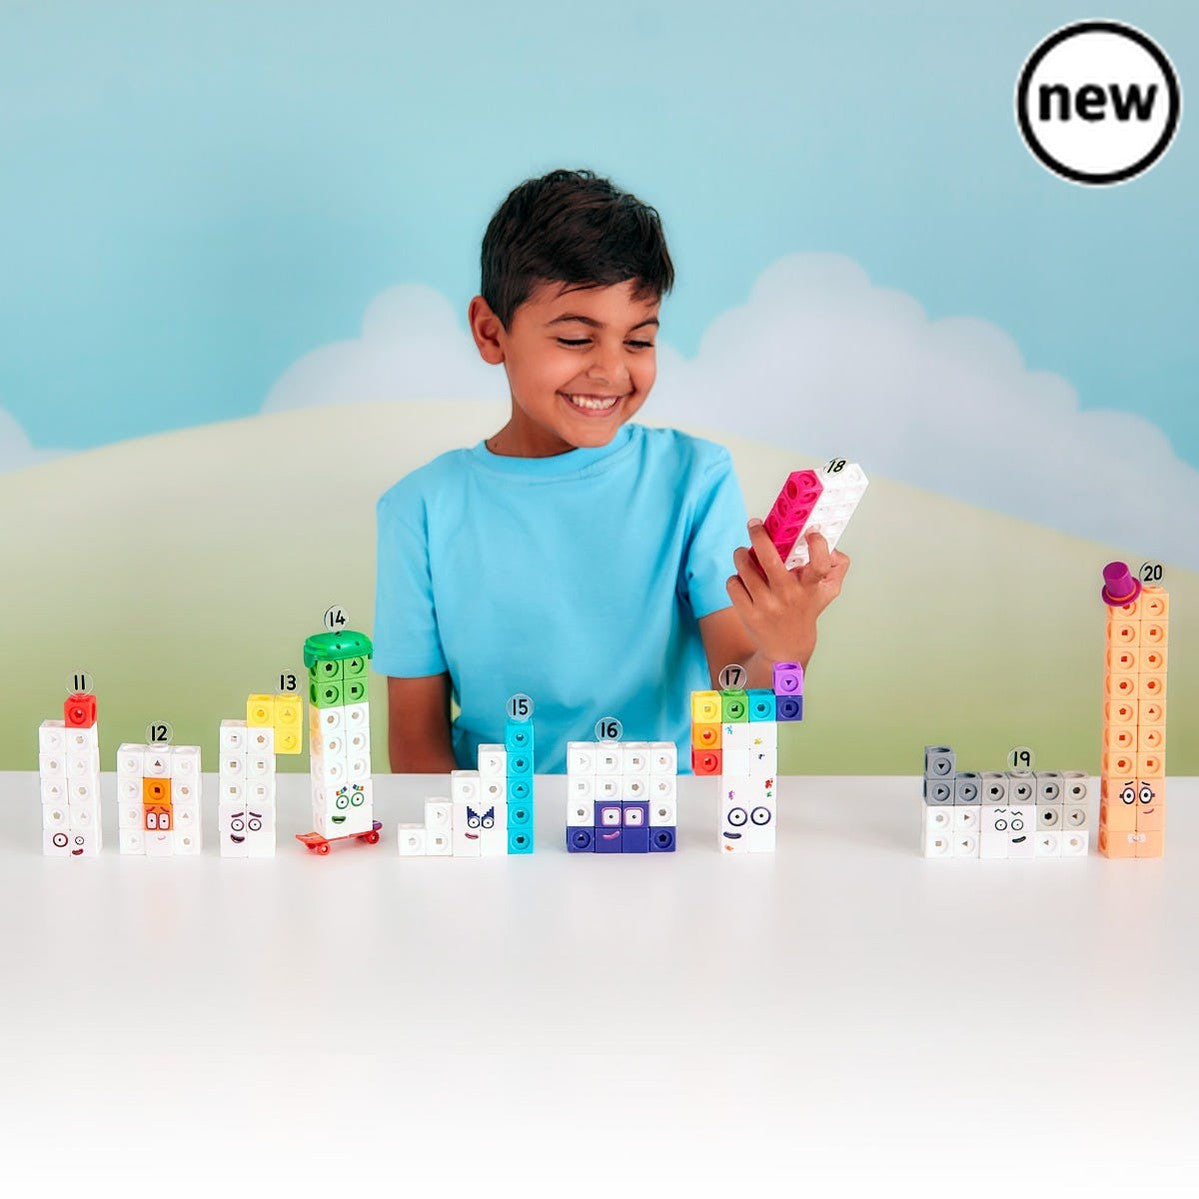 MathLink® Cubes Numberblocks 11-20 Activity Set, Meet the Numberblocks, stars of the award-winning CBeebies series! Now children can use special edition Numberblocks MathLink Cubes to build the Numberblocks Eleven to Twenty in all the ways shown in the series, and master early maths skills through fun activities. Ideal for learning in the classroom and at home, this MathLink Cubes Numberblocks 11-20 Activity Set brings Numberblocks learning to life as children create their very own Numberblocks Eleven to Tw